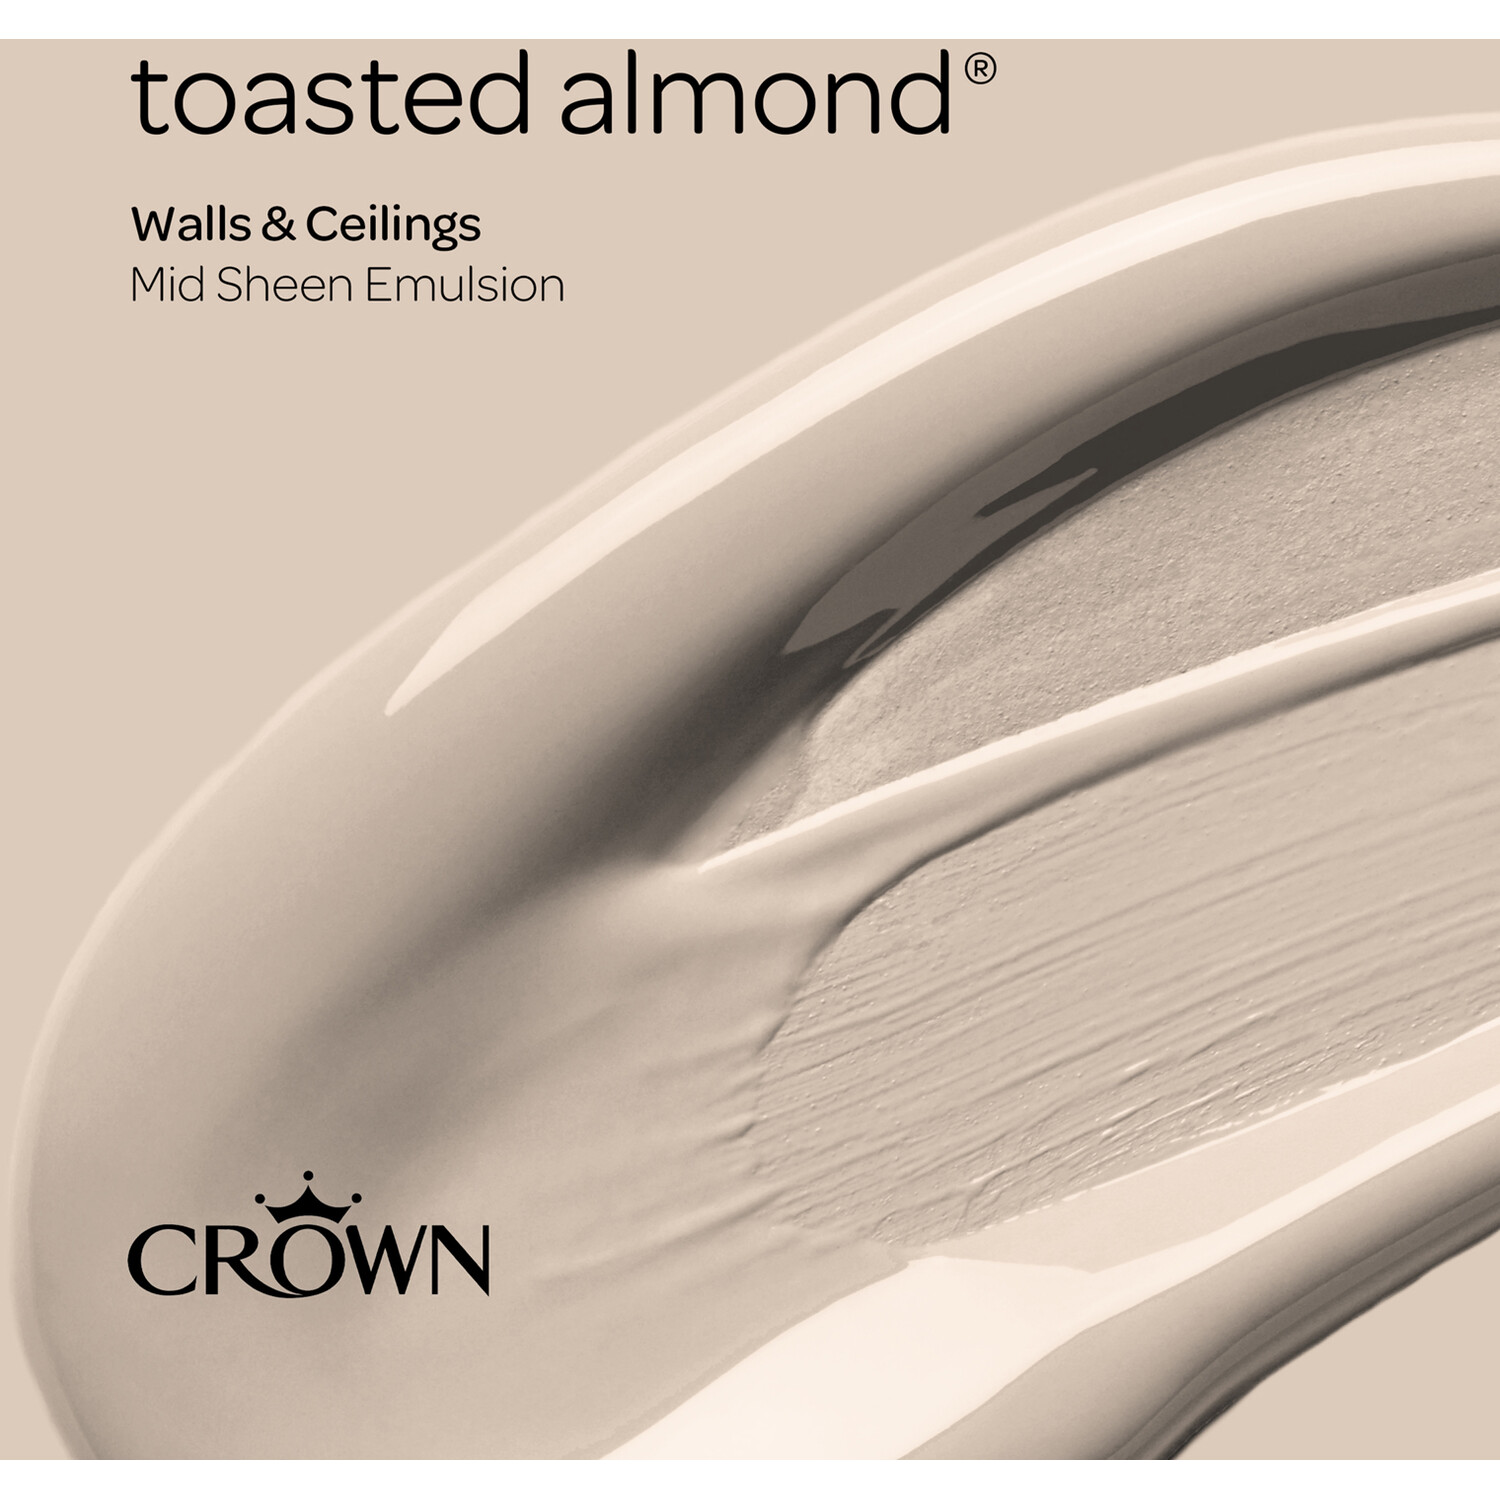 Crown Walls & Ceilings Toasted Almond Mid Sheen Emulsion Paint 5L Image 4